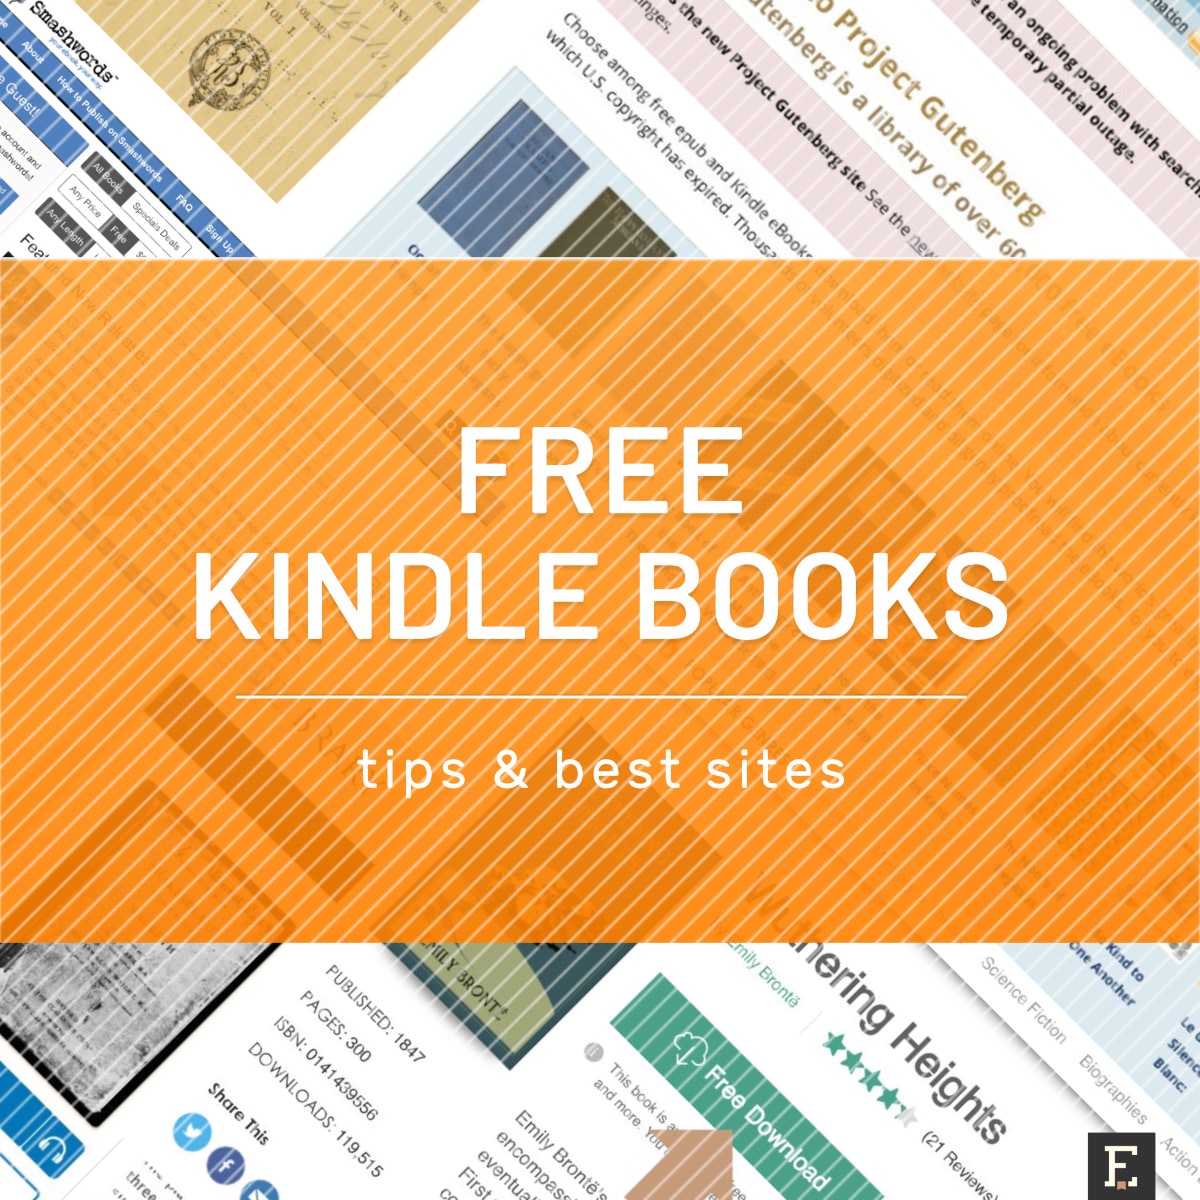 Where To Download Free Or Cheap Ebooks - Which?